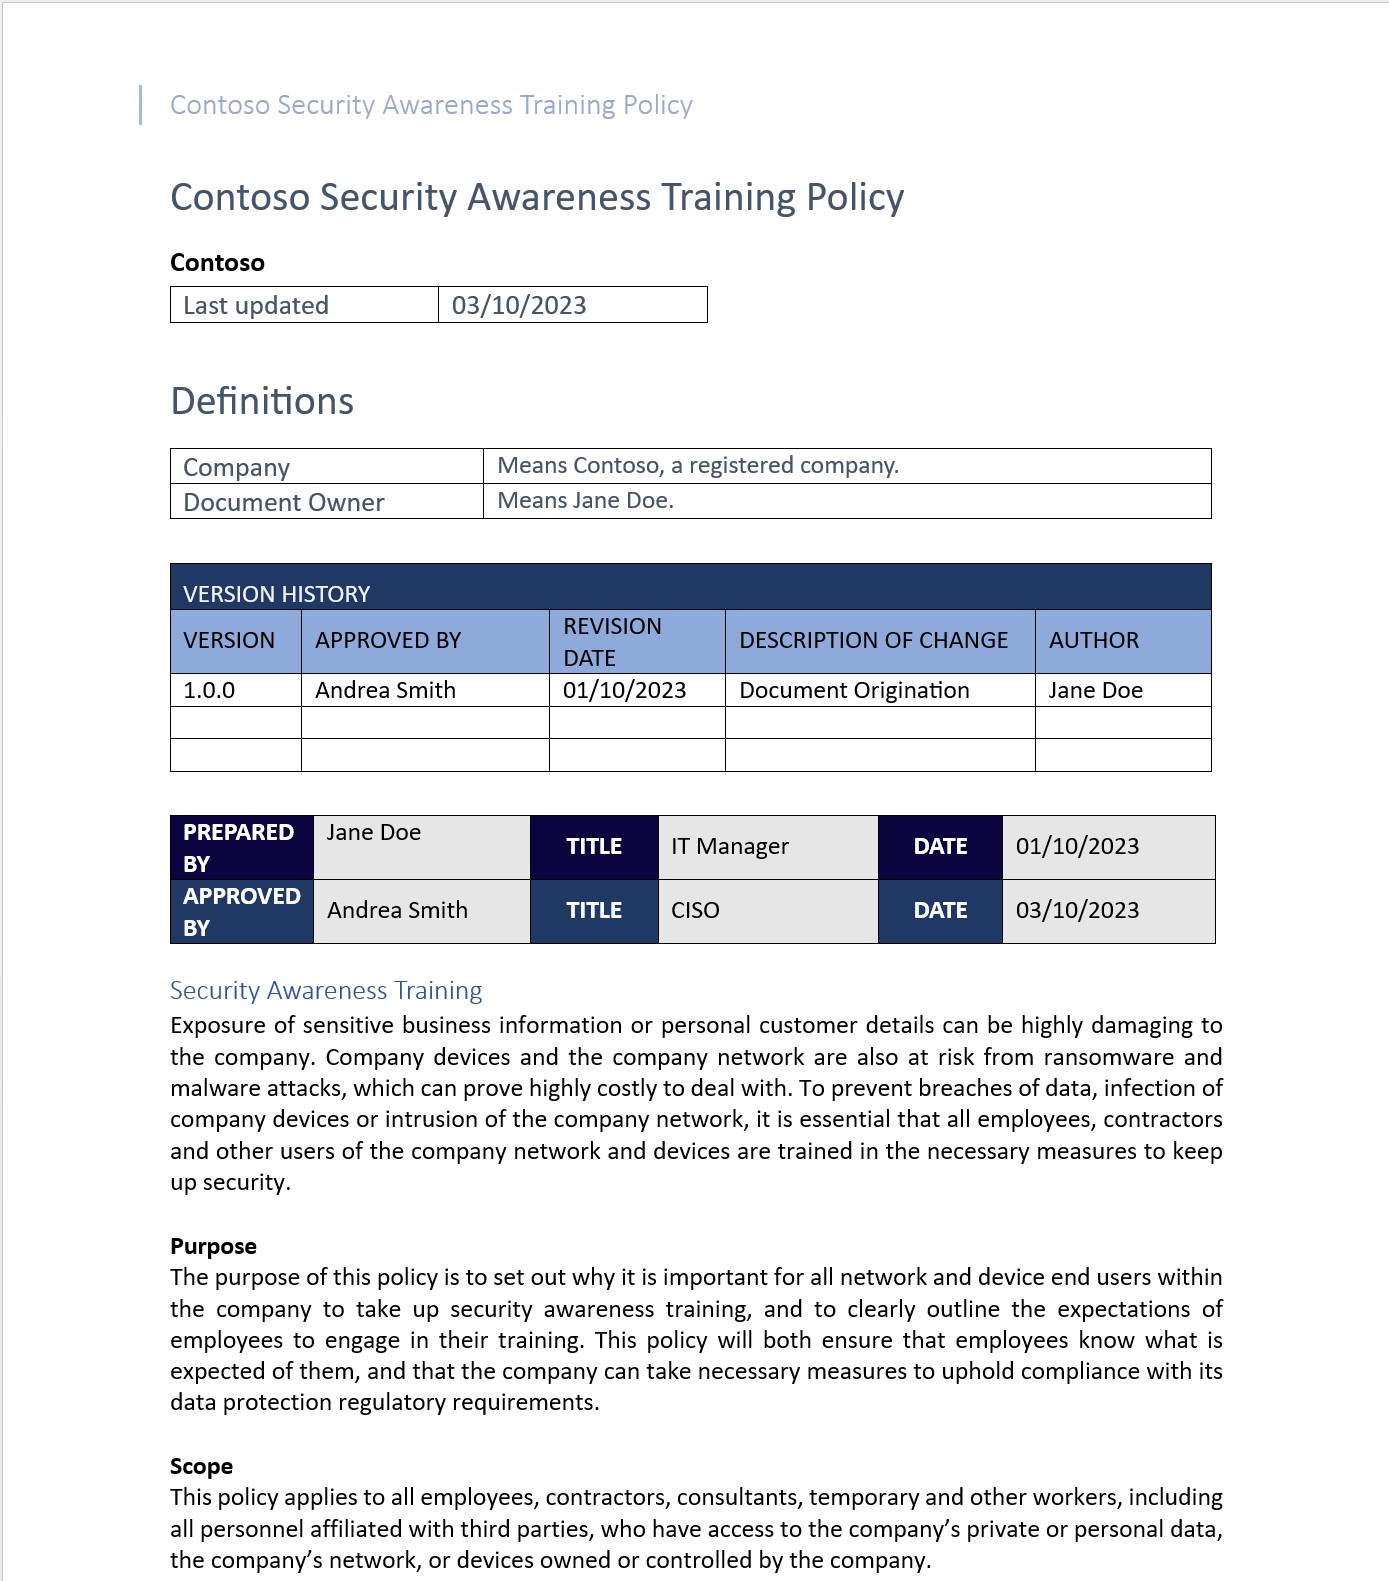 Security awareness training policy document